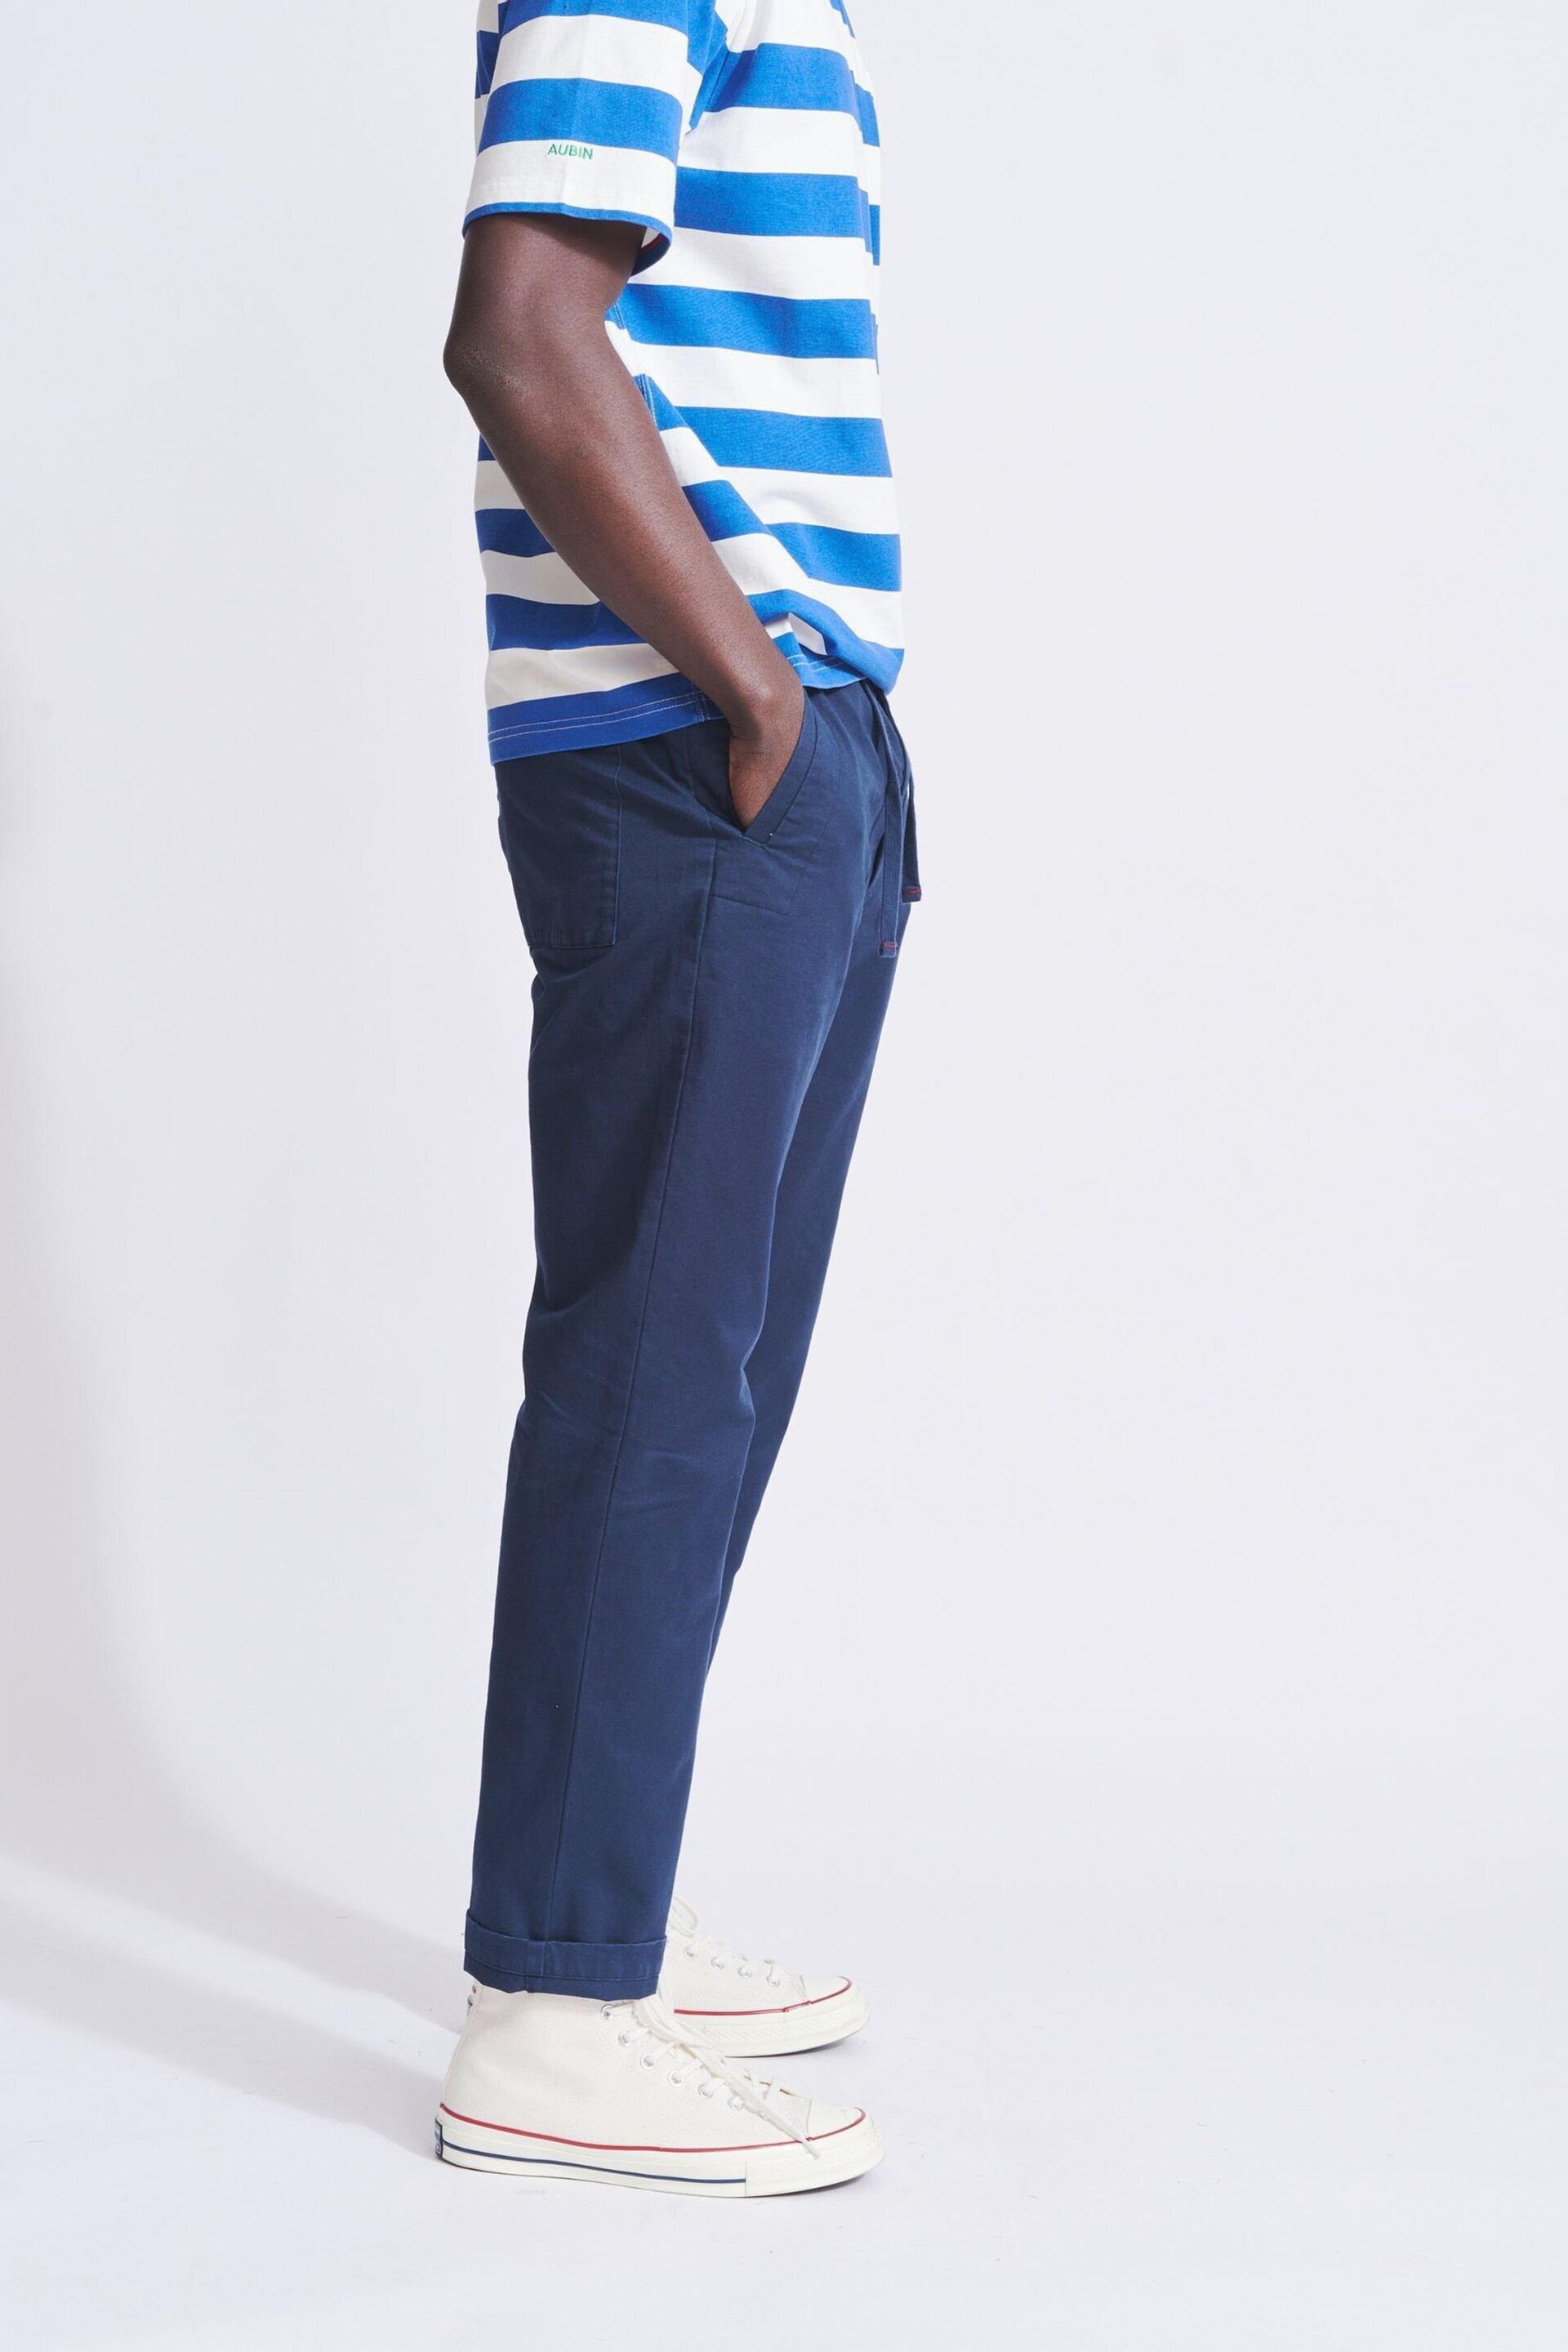 Aubin Ulceby Rugby Trousers - Image 3 of 6